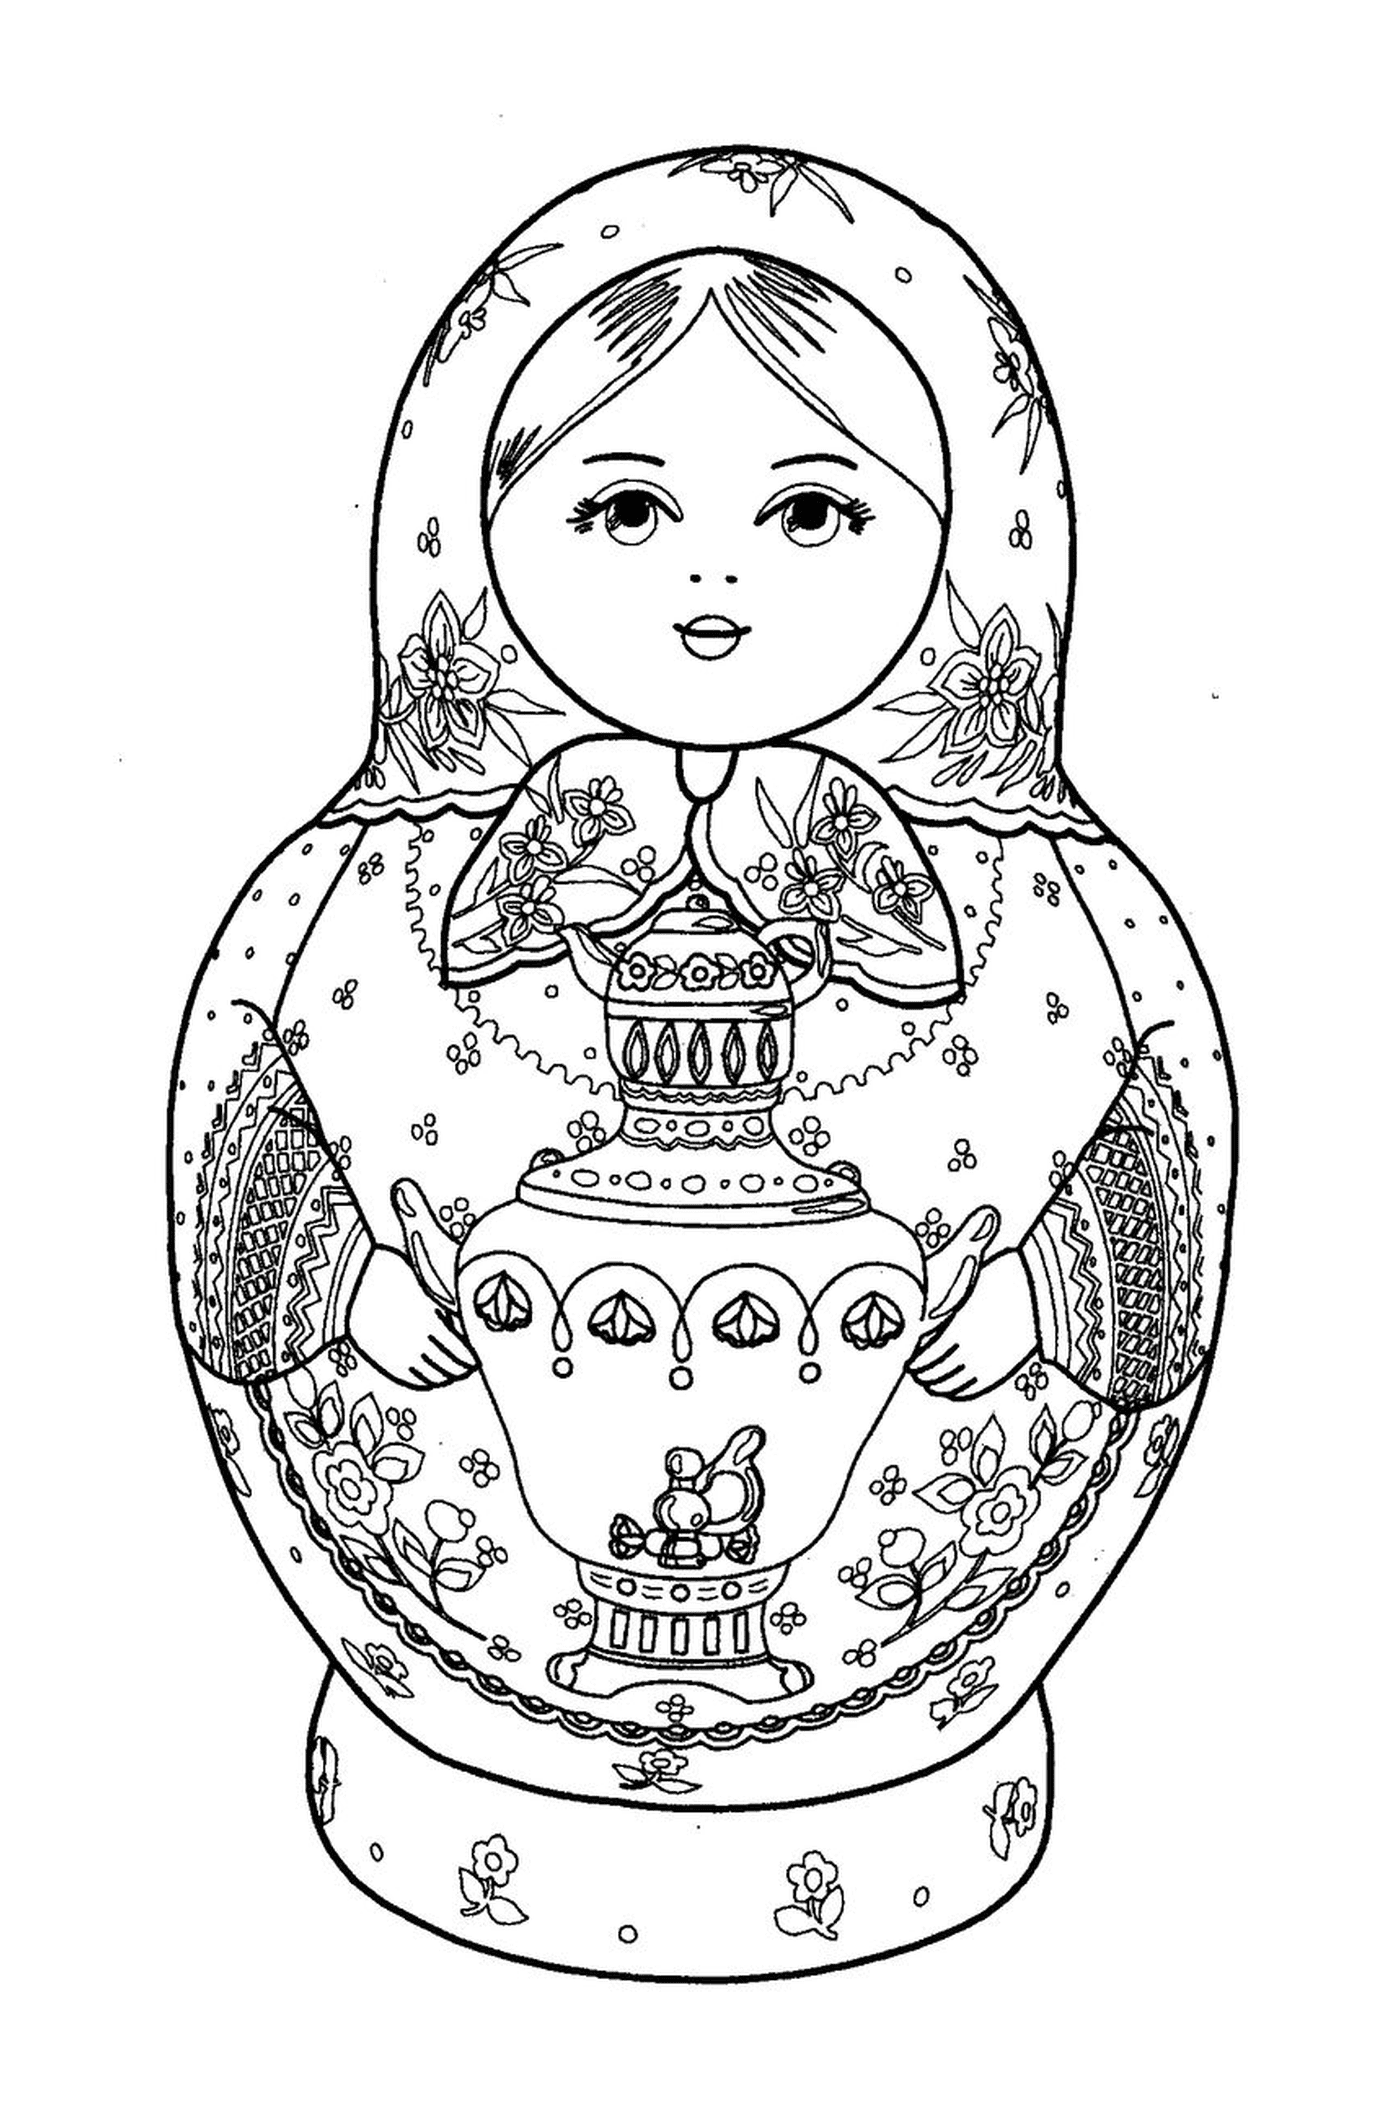  Russian doll numbered two 